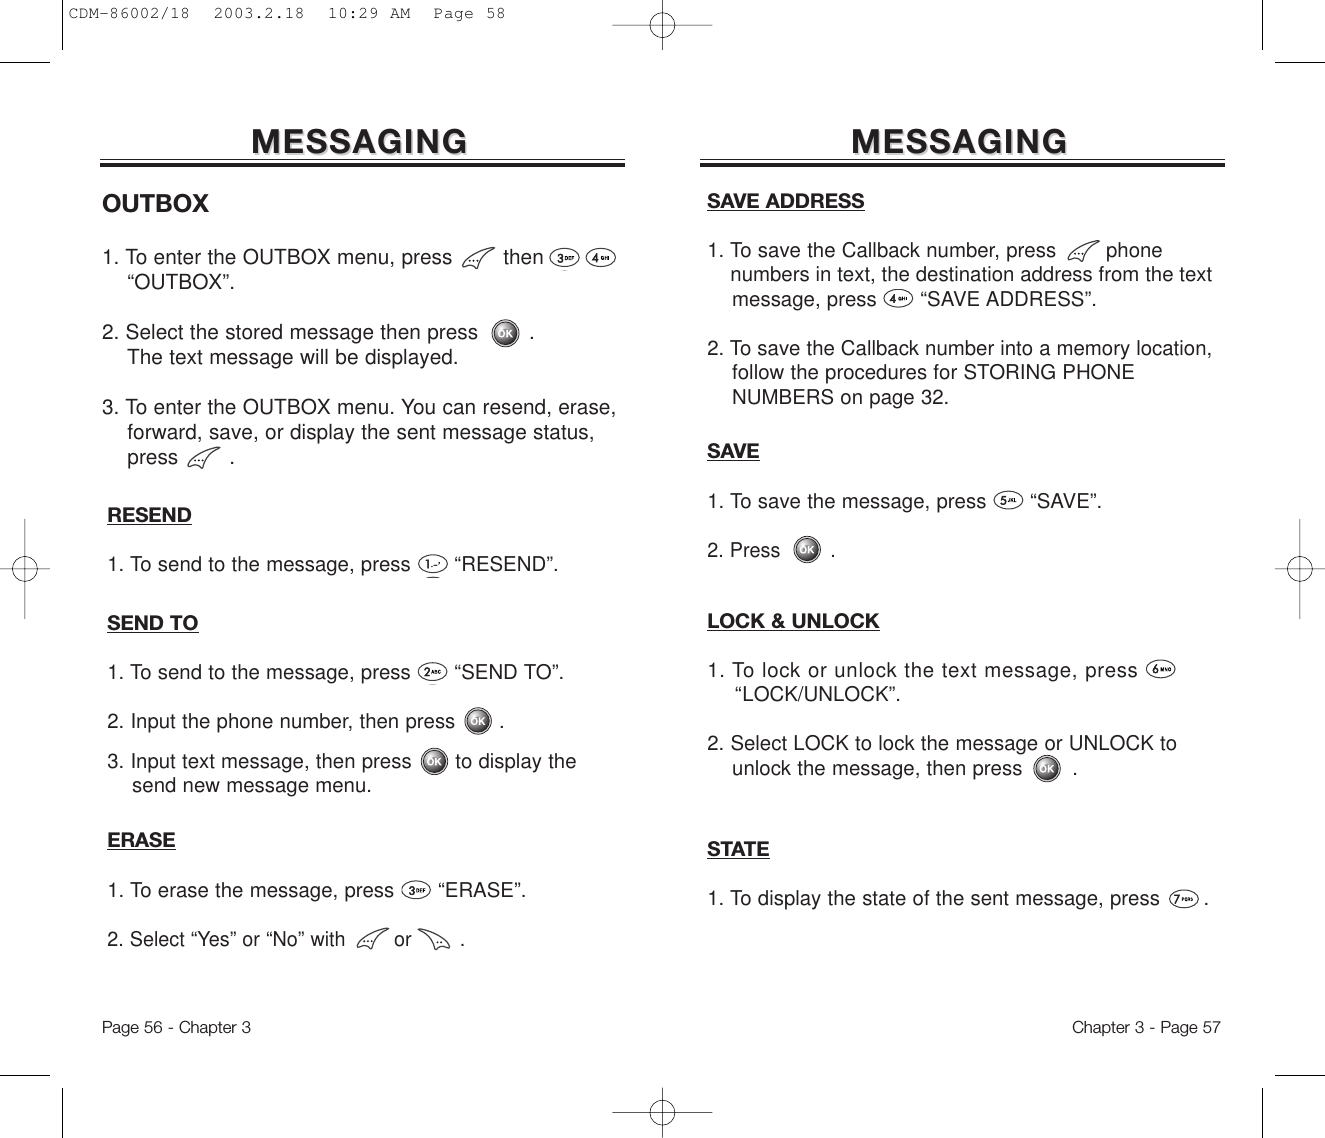 MESSAGINGMESSAGINGChapter 3 - Page 57MESSAGINGMESSAGINGOUTBOX1. To enter the OUTBOX menu, press then “OUTBOX”.2. Select the stored message then press . The text message will be displayed.3. To enter the OUTBOX menu. You can resend, erase, forward, save, or display the sent message status, press .Page 56 - Chapter 3SAVE1. To save the message, press       “SAVE”.2. Press .STATE1. To display the state of the sent message, press       . RESEND1. To send to the message, press       “RESEND”.ERASE1. To erase the message, press “ERASE”.2. Select “Yes” or “No” with        or        .SAVE ADDRESS1. To save the Callback number, press        phone numbers in text, the destination address from the text message, press       “SAVE ADDRESS”.  2. To save the Callback number into a memory location, follow the procedures for STORING PHONE NUMBERS on page 32.SEND TO1. To send to the message, press “SEND TO”.2. Input the phone number, then press       .3. Input text message, then press       to display the send new message menu.LOCK &amp; UNLOCK1. To lock or unlock the text message, press“LOCK/UNLOCK”.2. Select LOCK to lock the message or UNLOCK to unlock the message, then press        .CDM-86002/18  2003.2.18  10:29 AM  Page 58